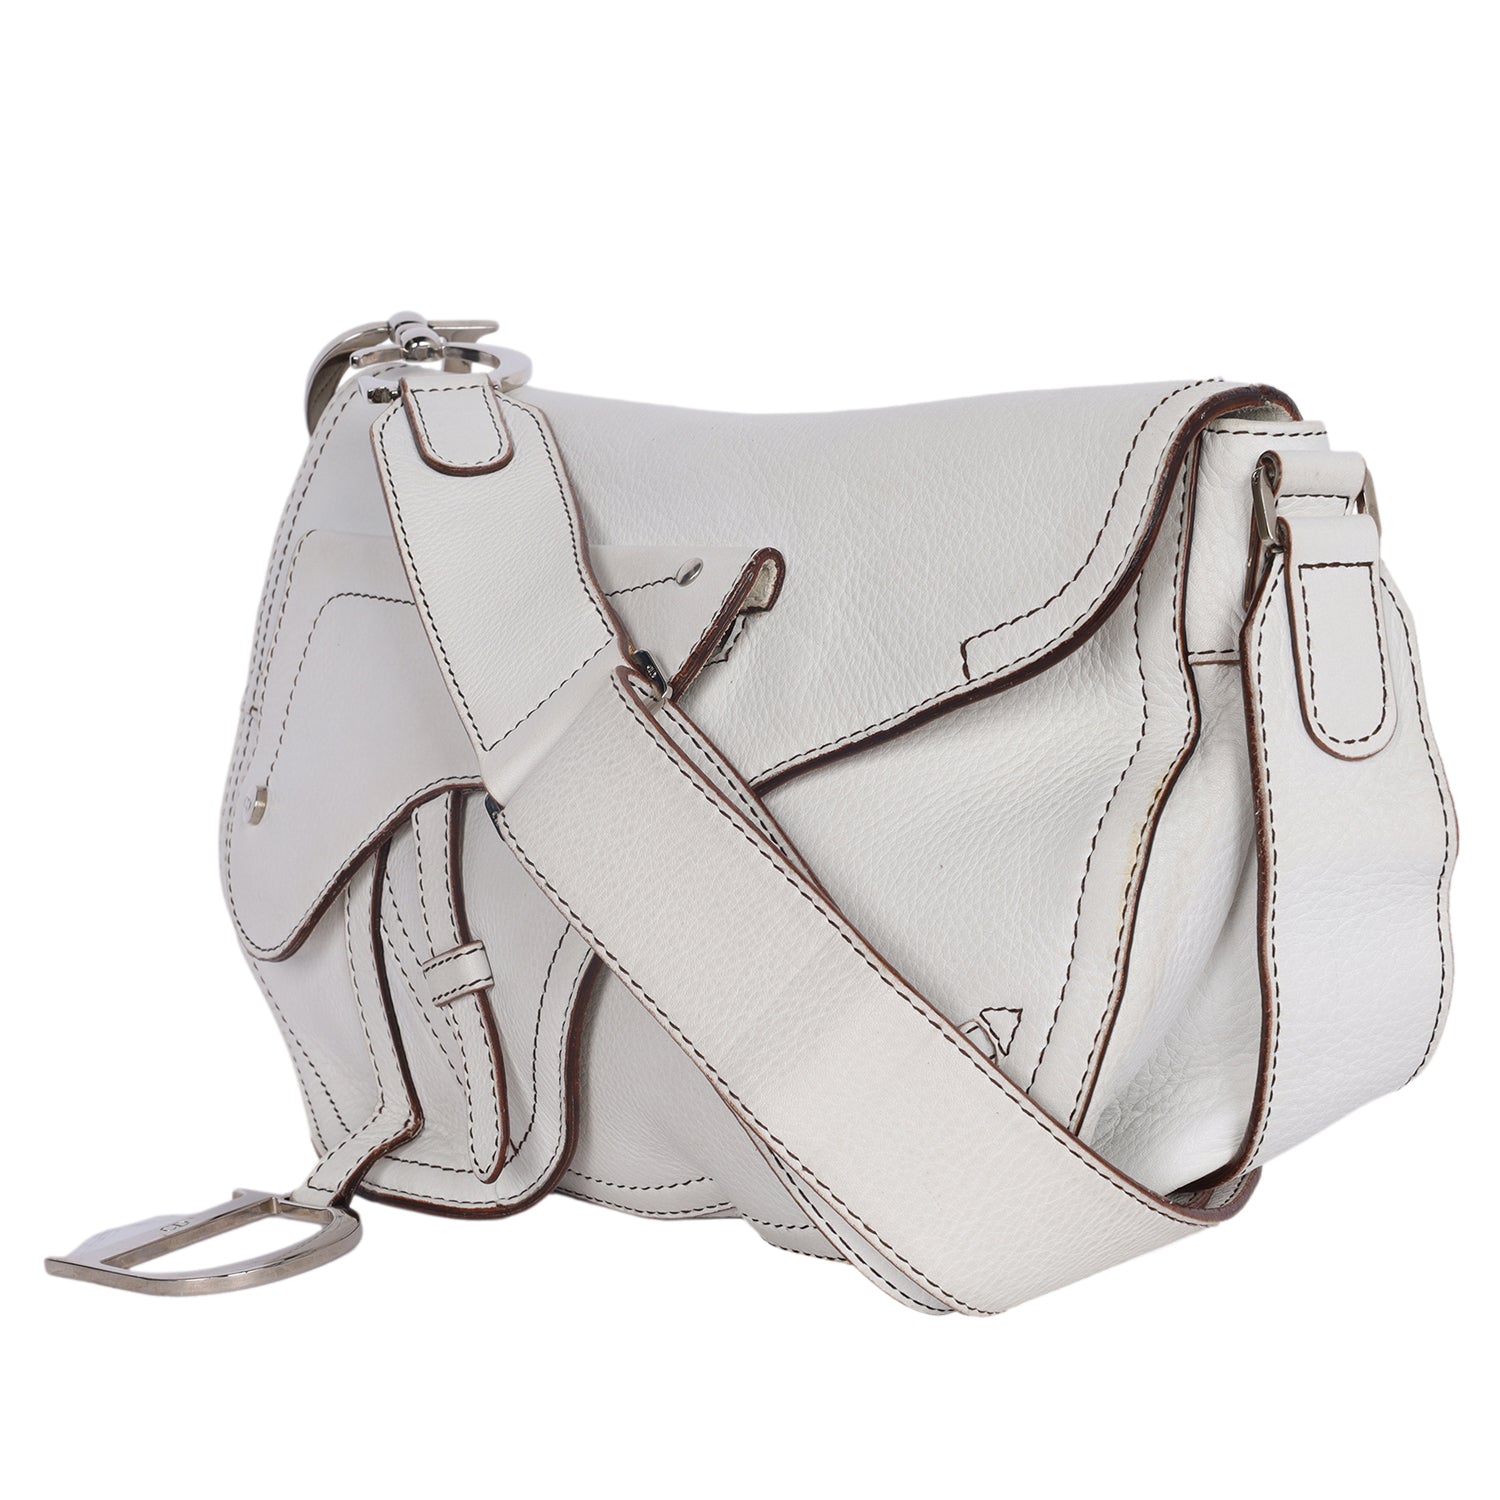 Dior - Saddle Bag - Off White Grained - Pre-Loved